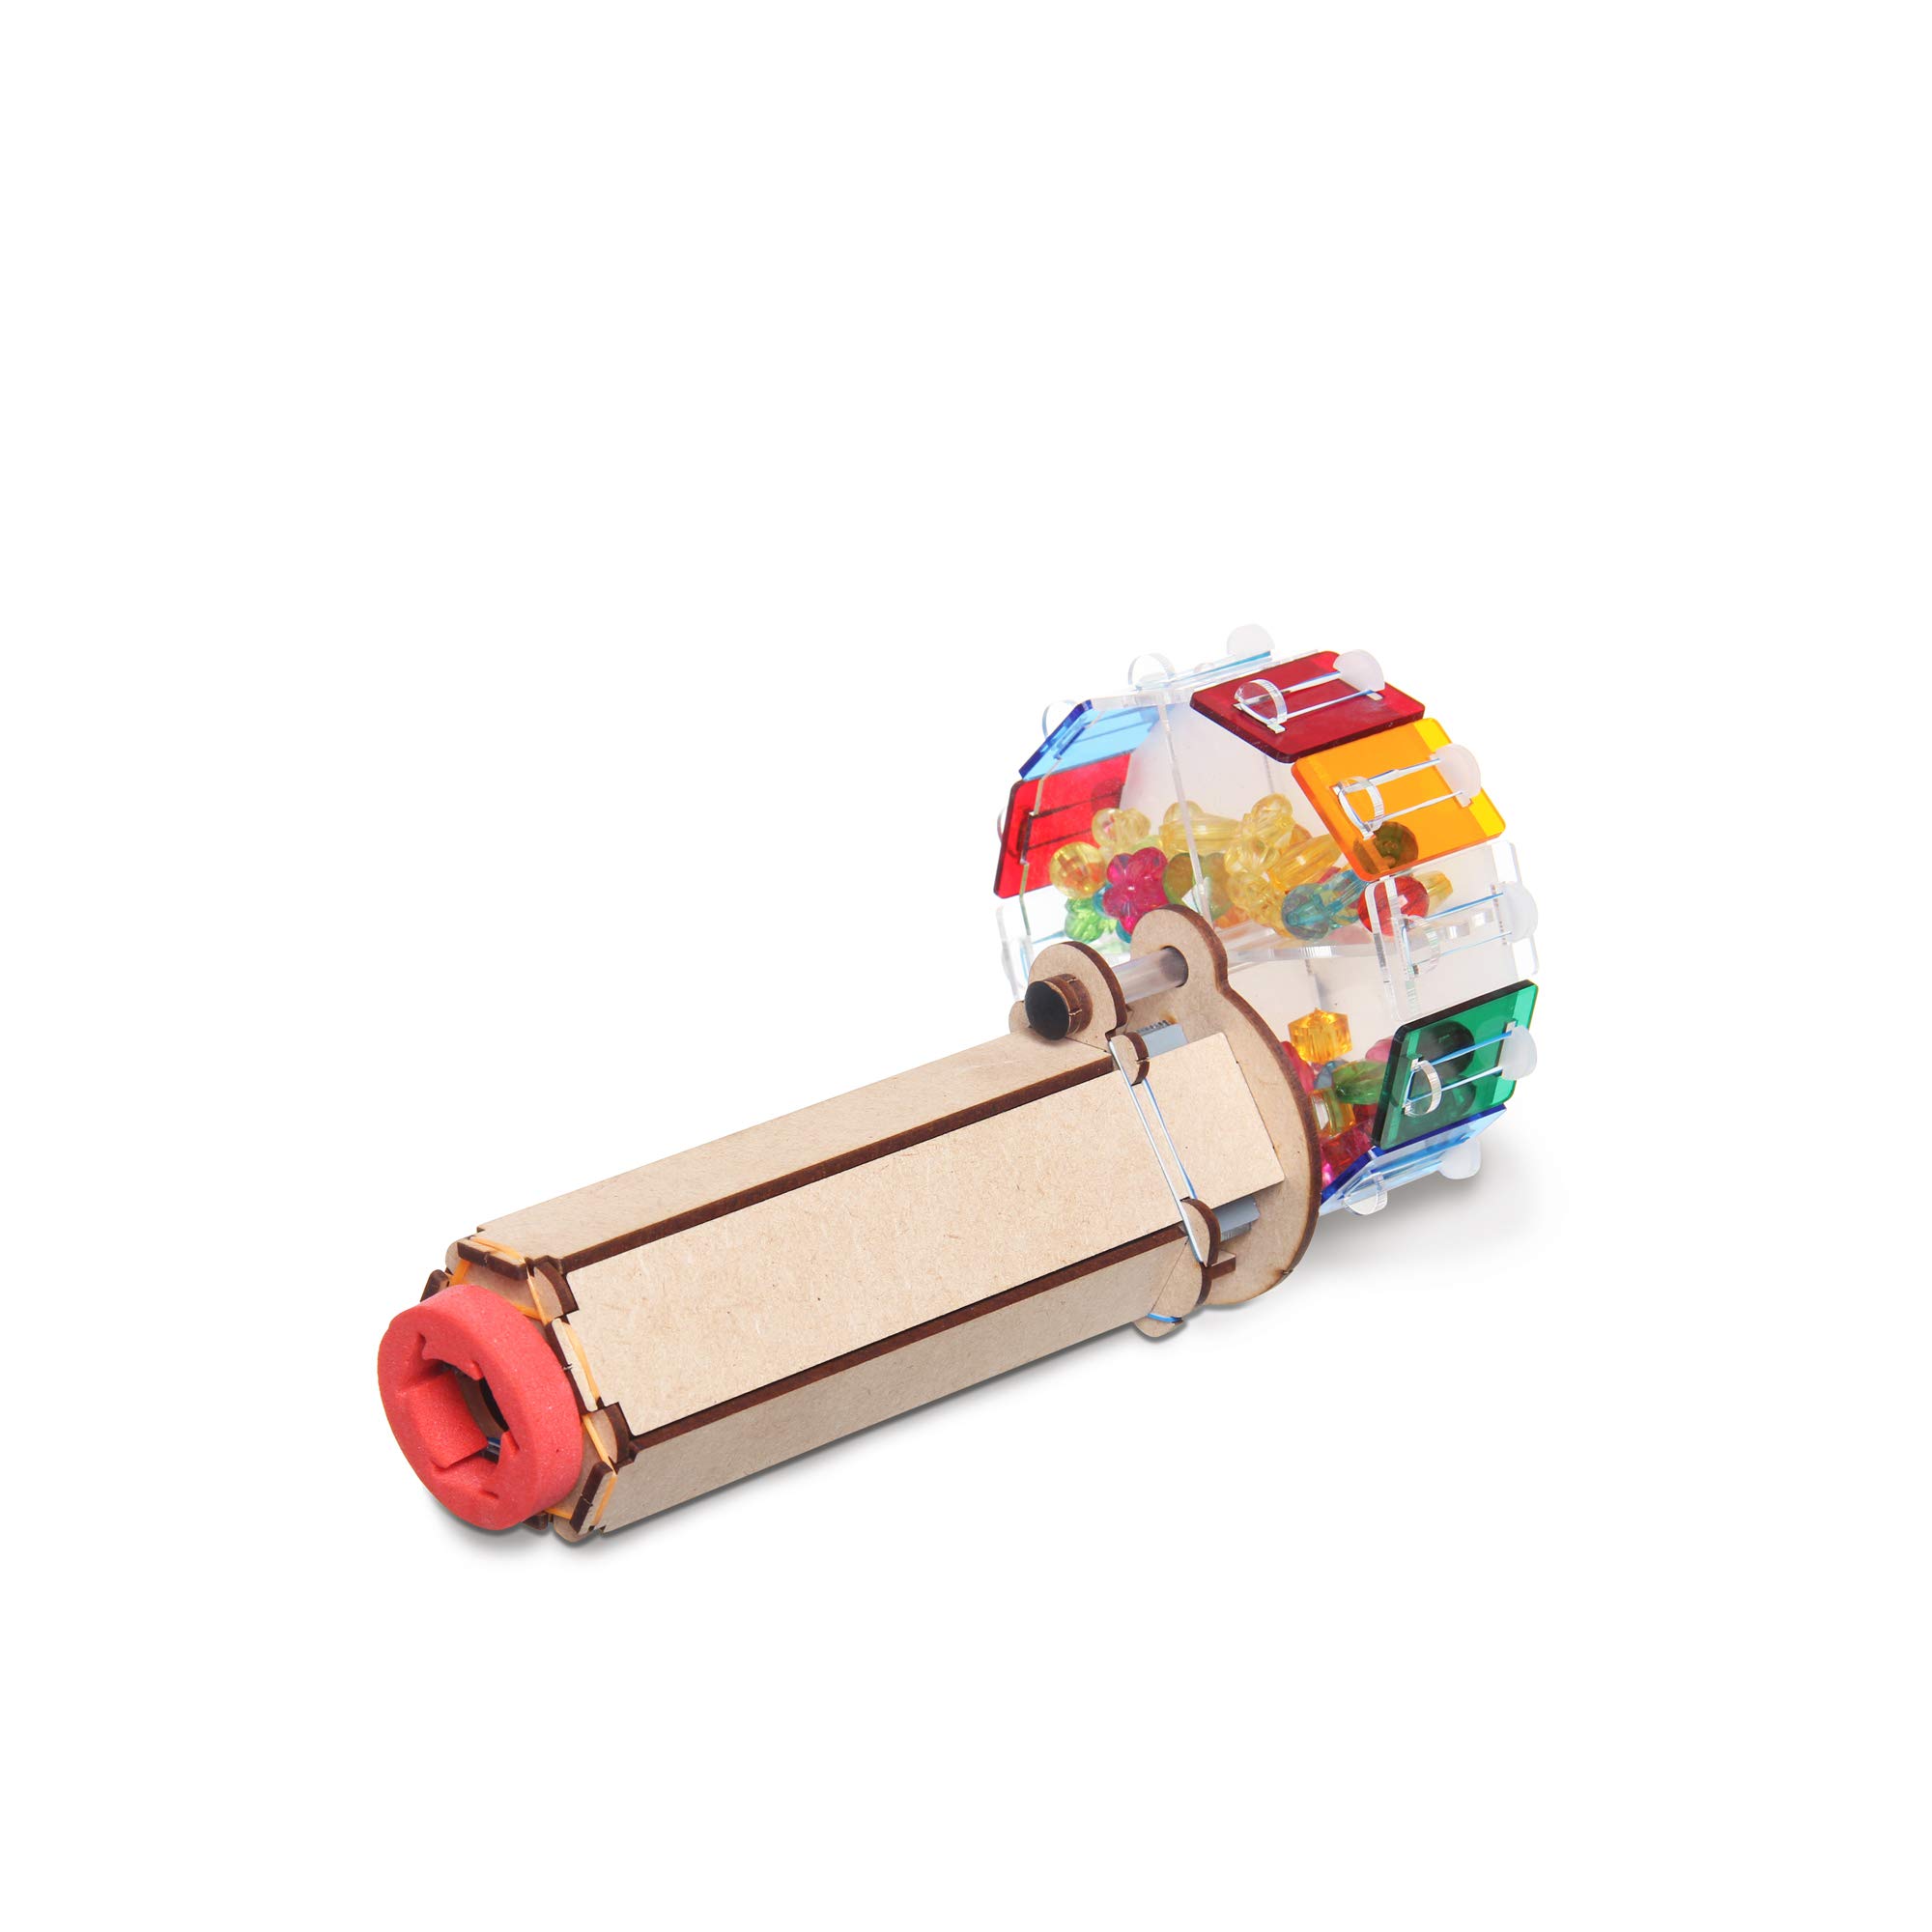 Smartivity Kaleidoscope 3D Wooden Model Engineering STEM Building Toy for Kids Ages 6 and Up